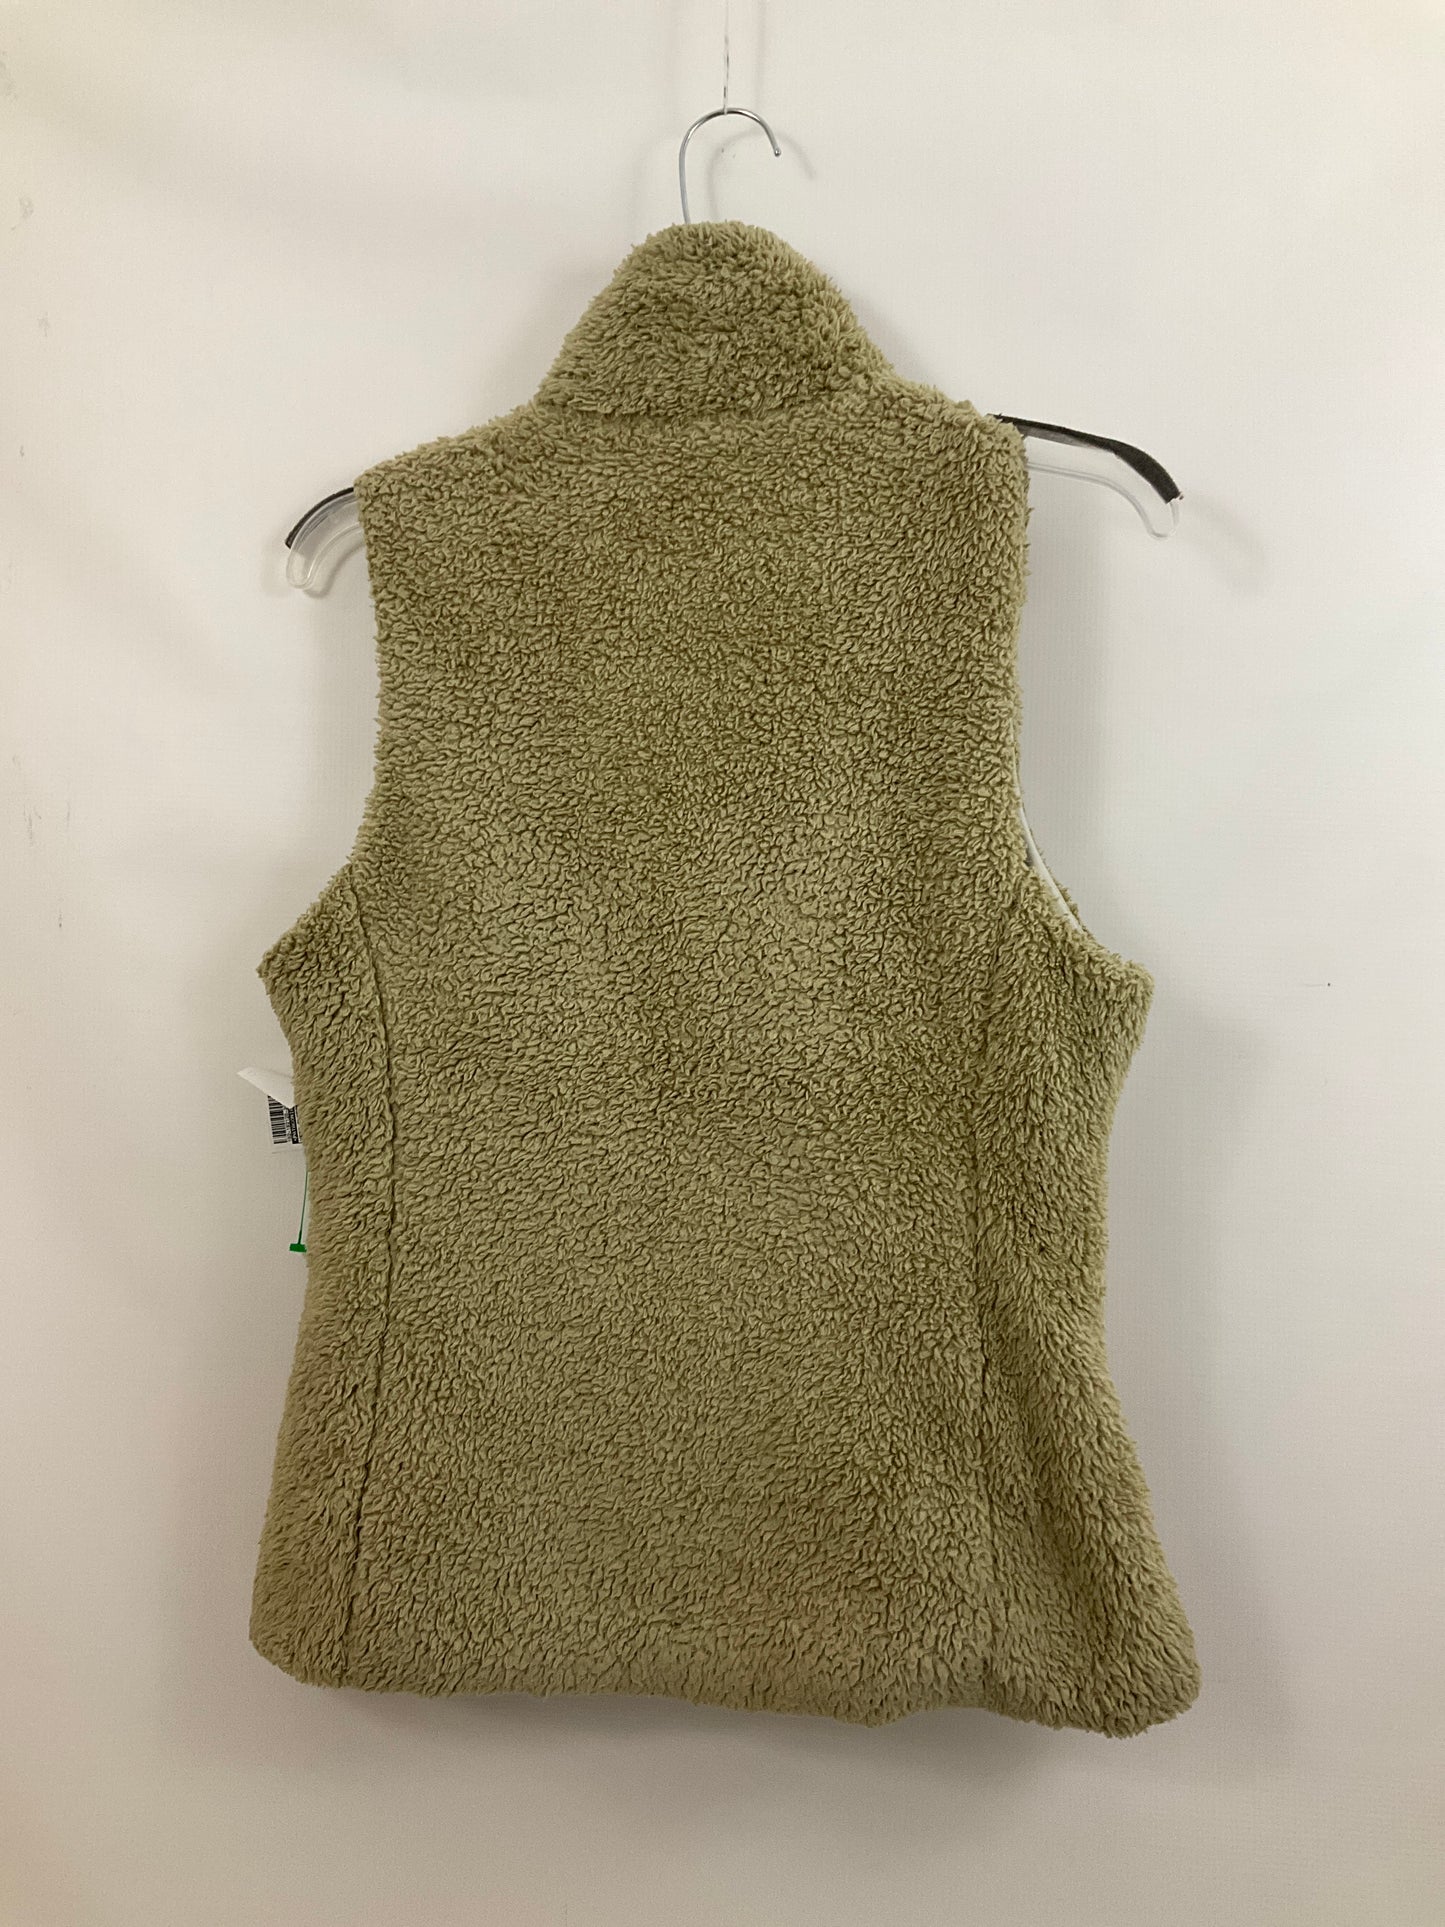 Vest Fleece By Patagonia  Size: M